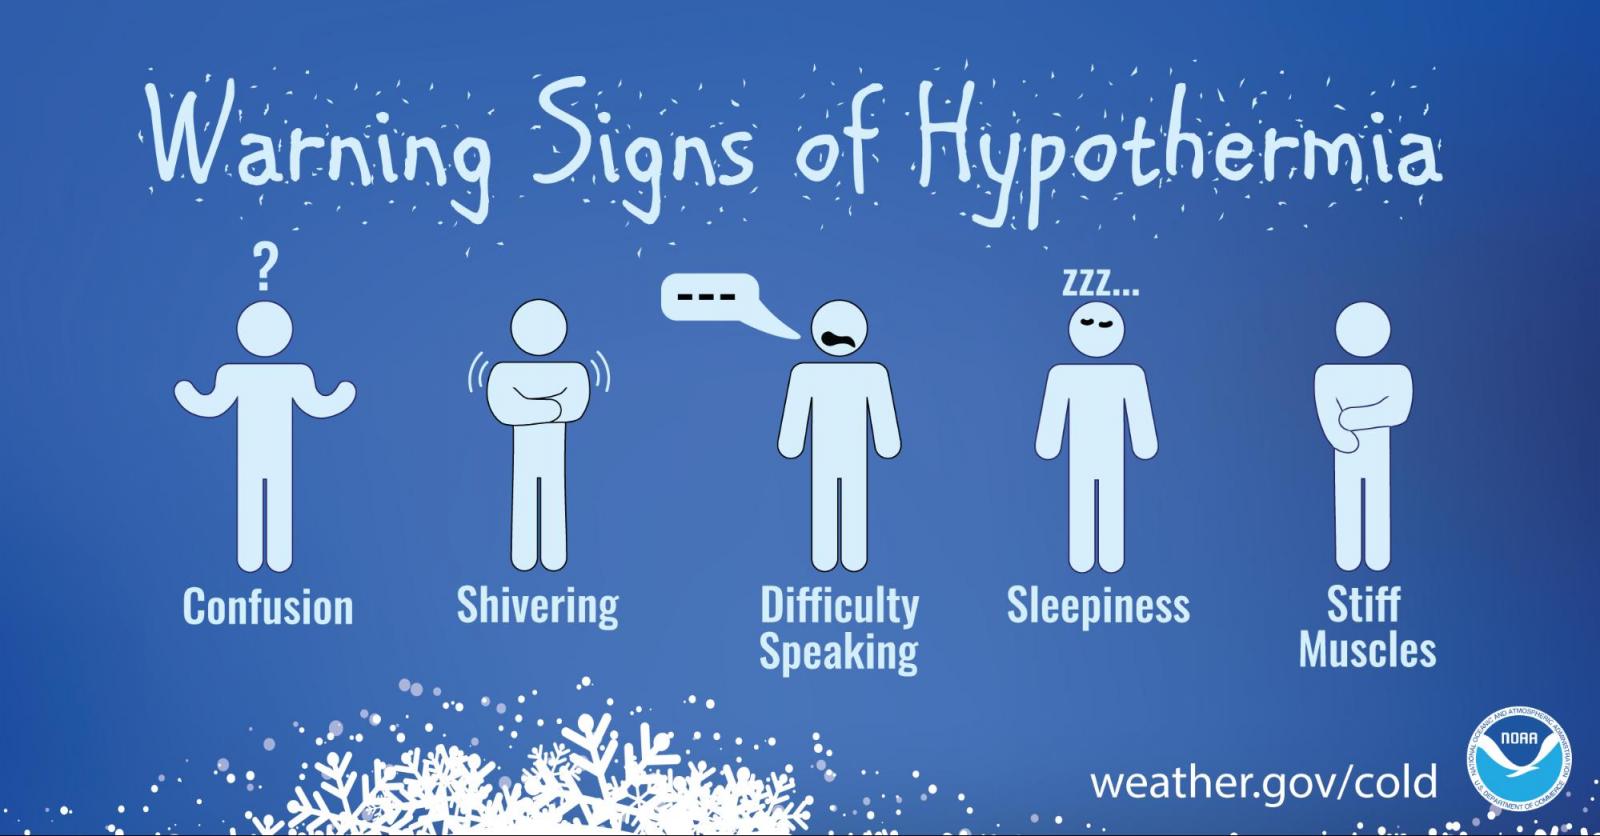 Warning signs of hypothermia: confusion, shivering, difficulty speaking, sleepiness, stiff muscles.